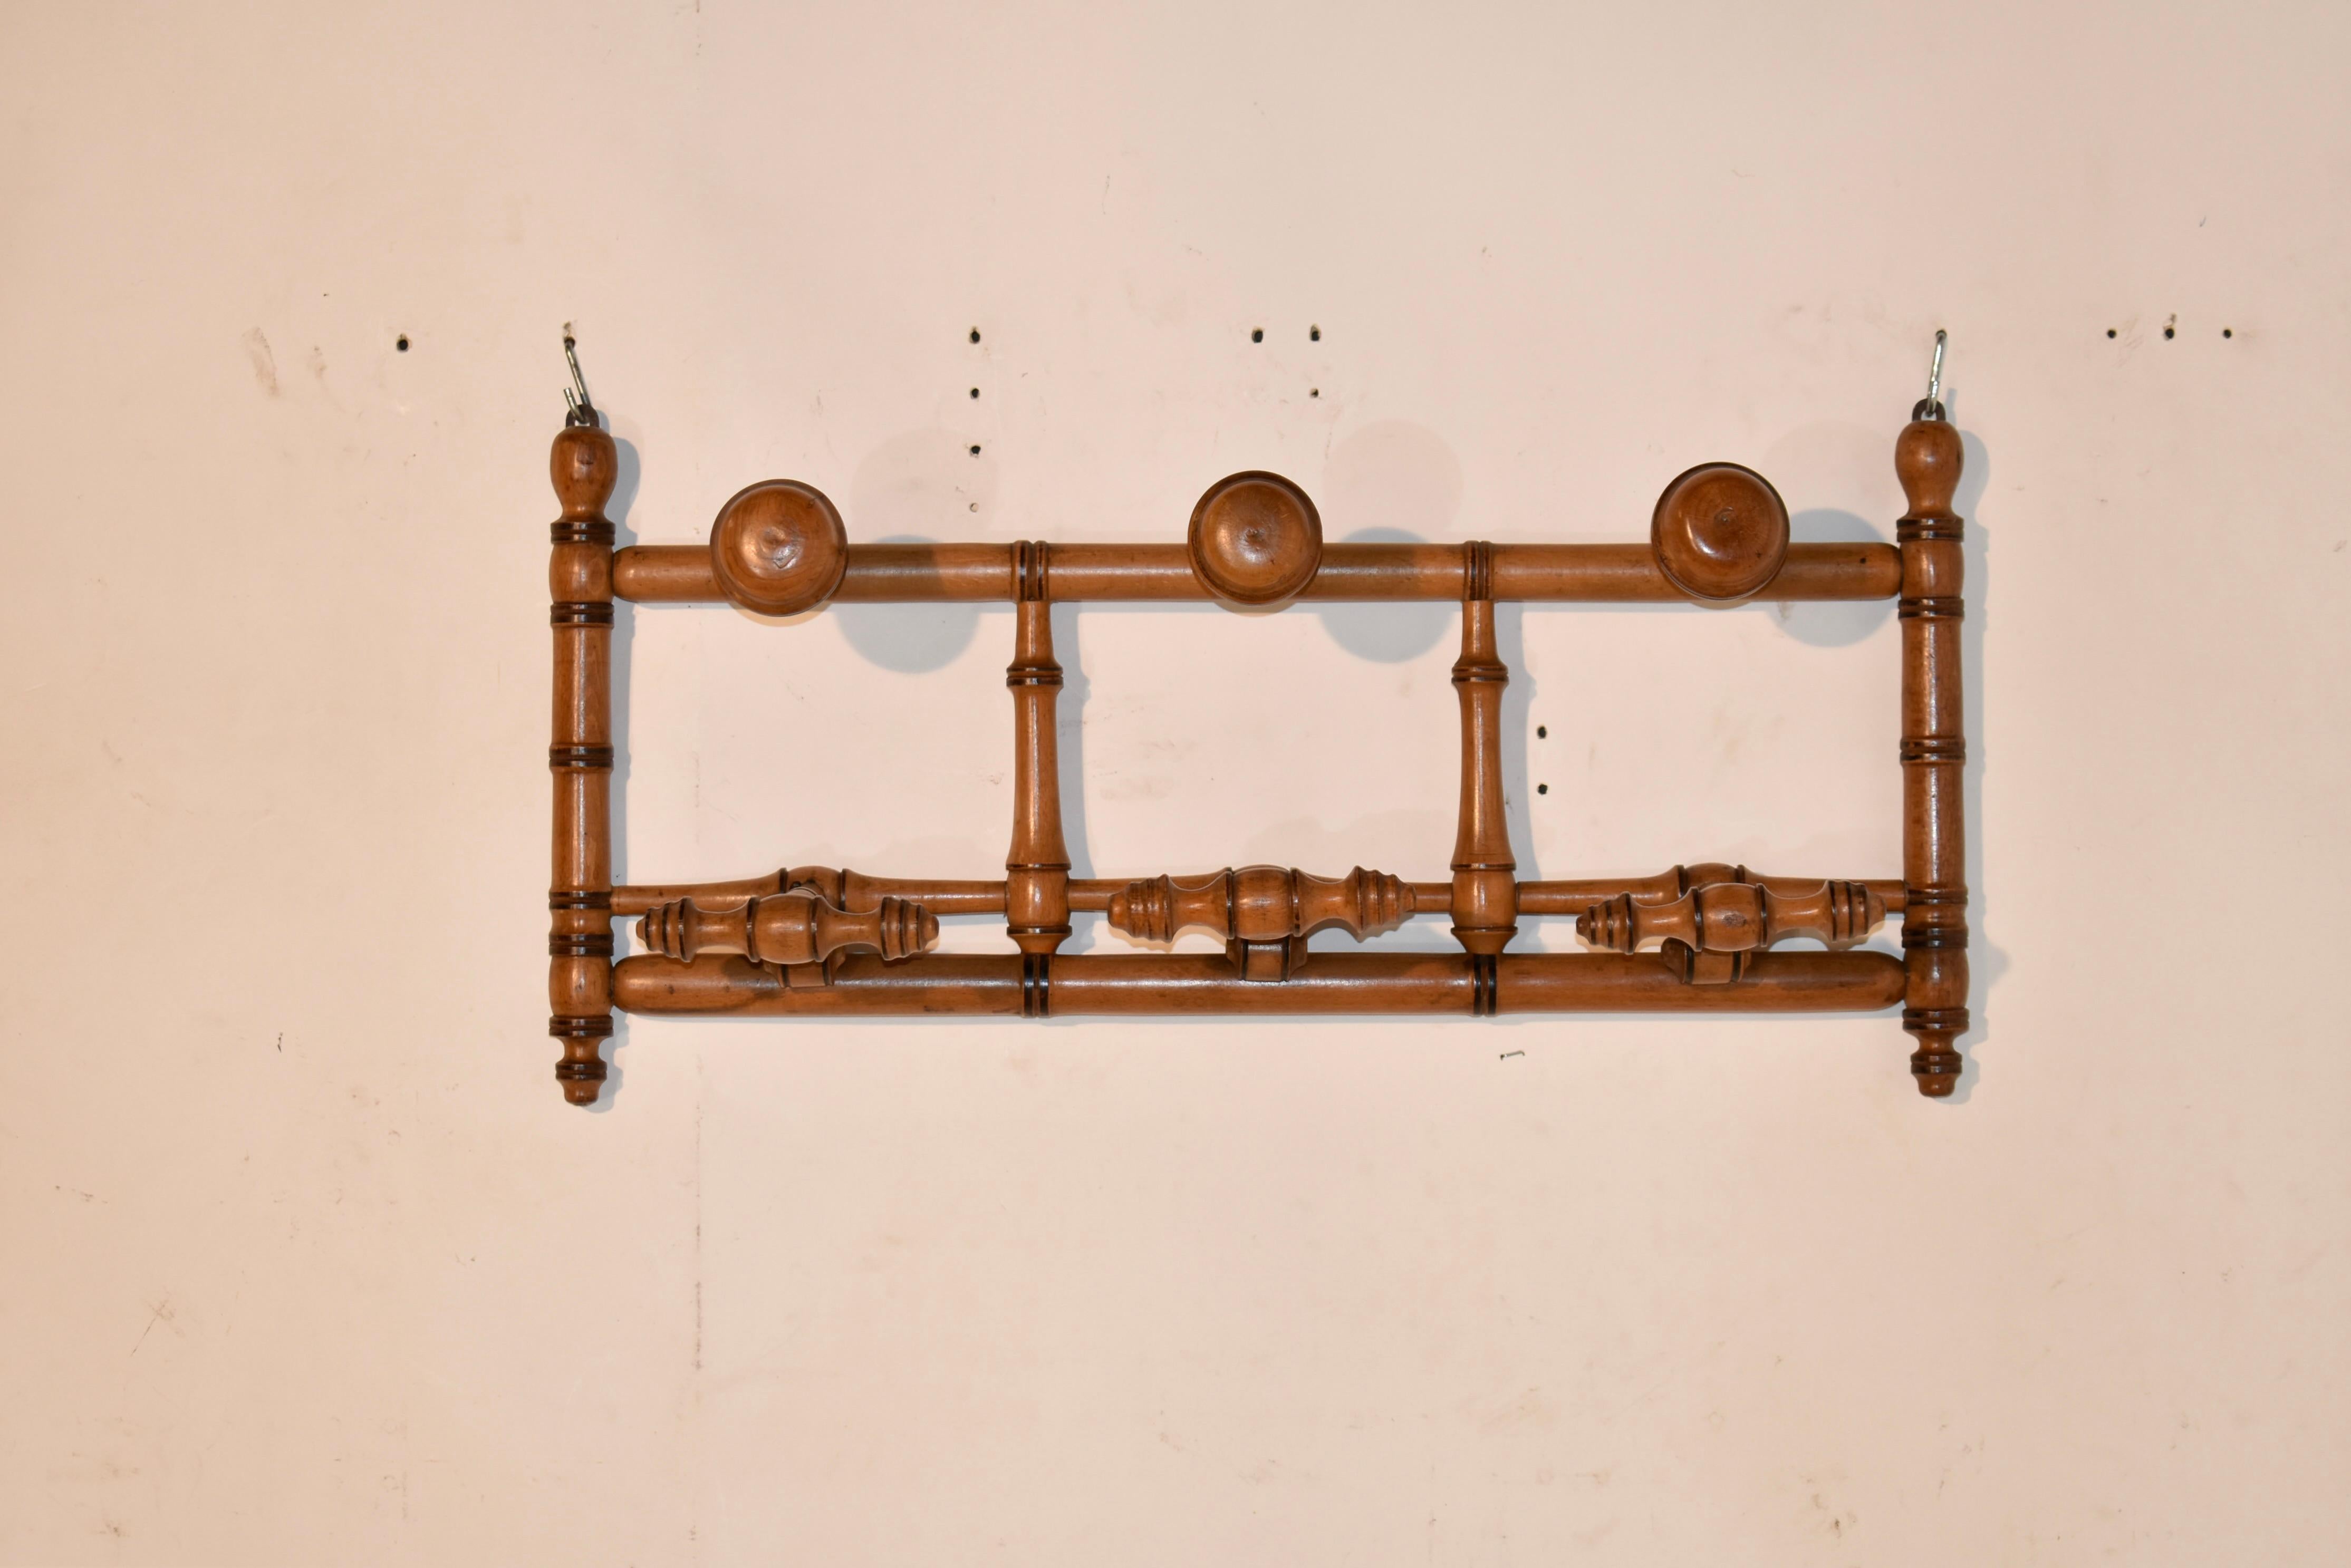 19th century cherry hanging wall coat and hat rack from France.  The lollipop knobs at the top are for hats, and the lower hangers pull down from a flat position to accommodate coats, or more hats, dog leashes, etc.  This is so versatile - it could